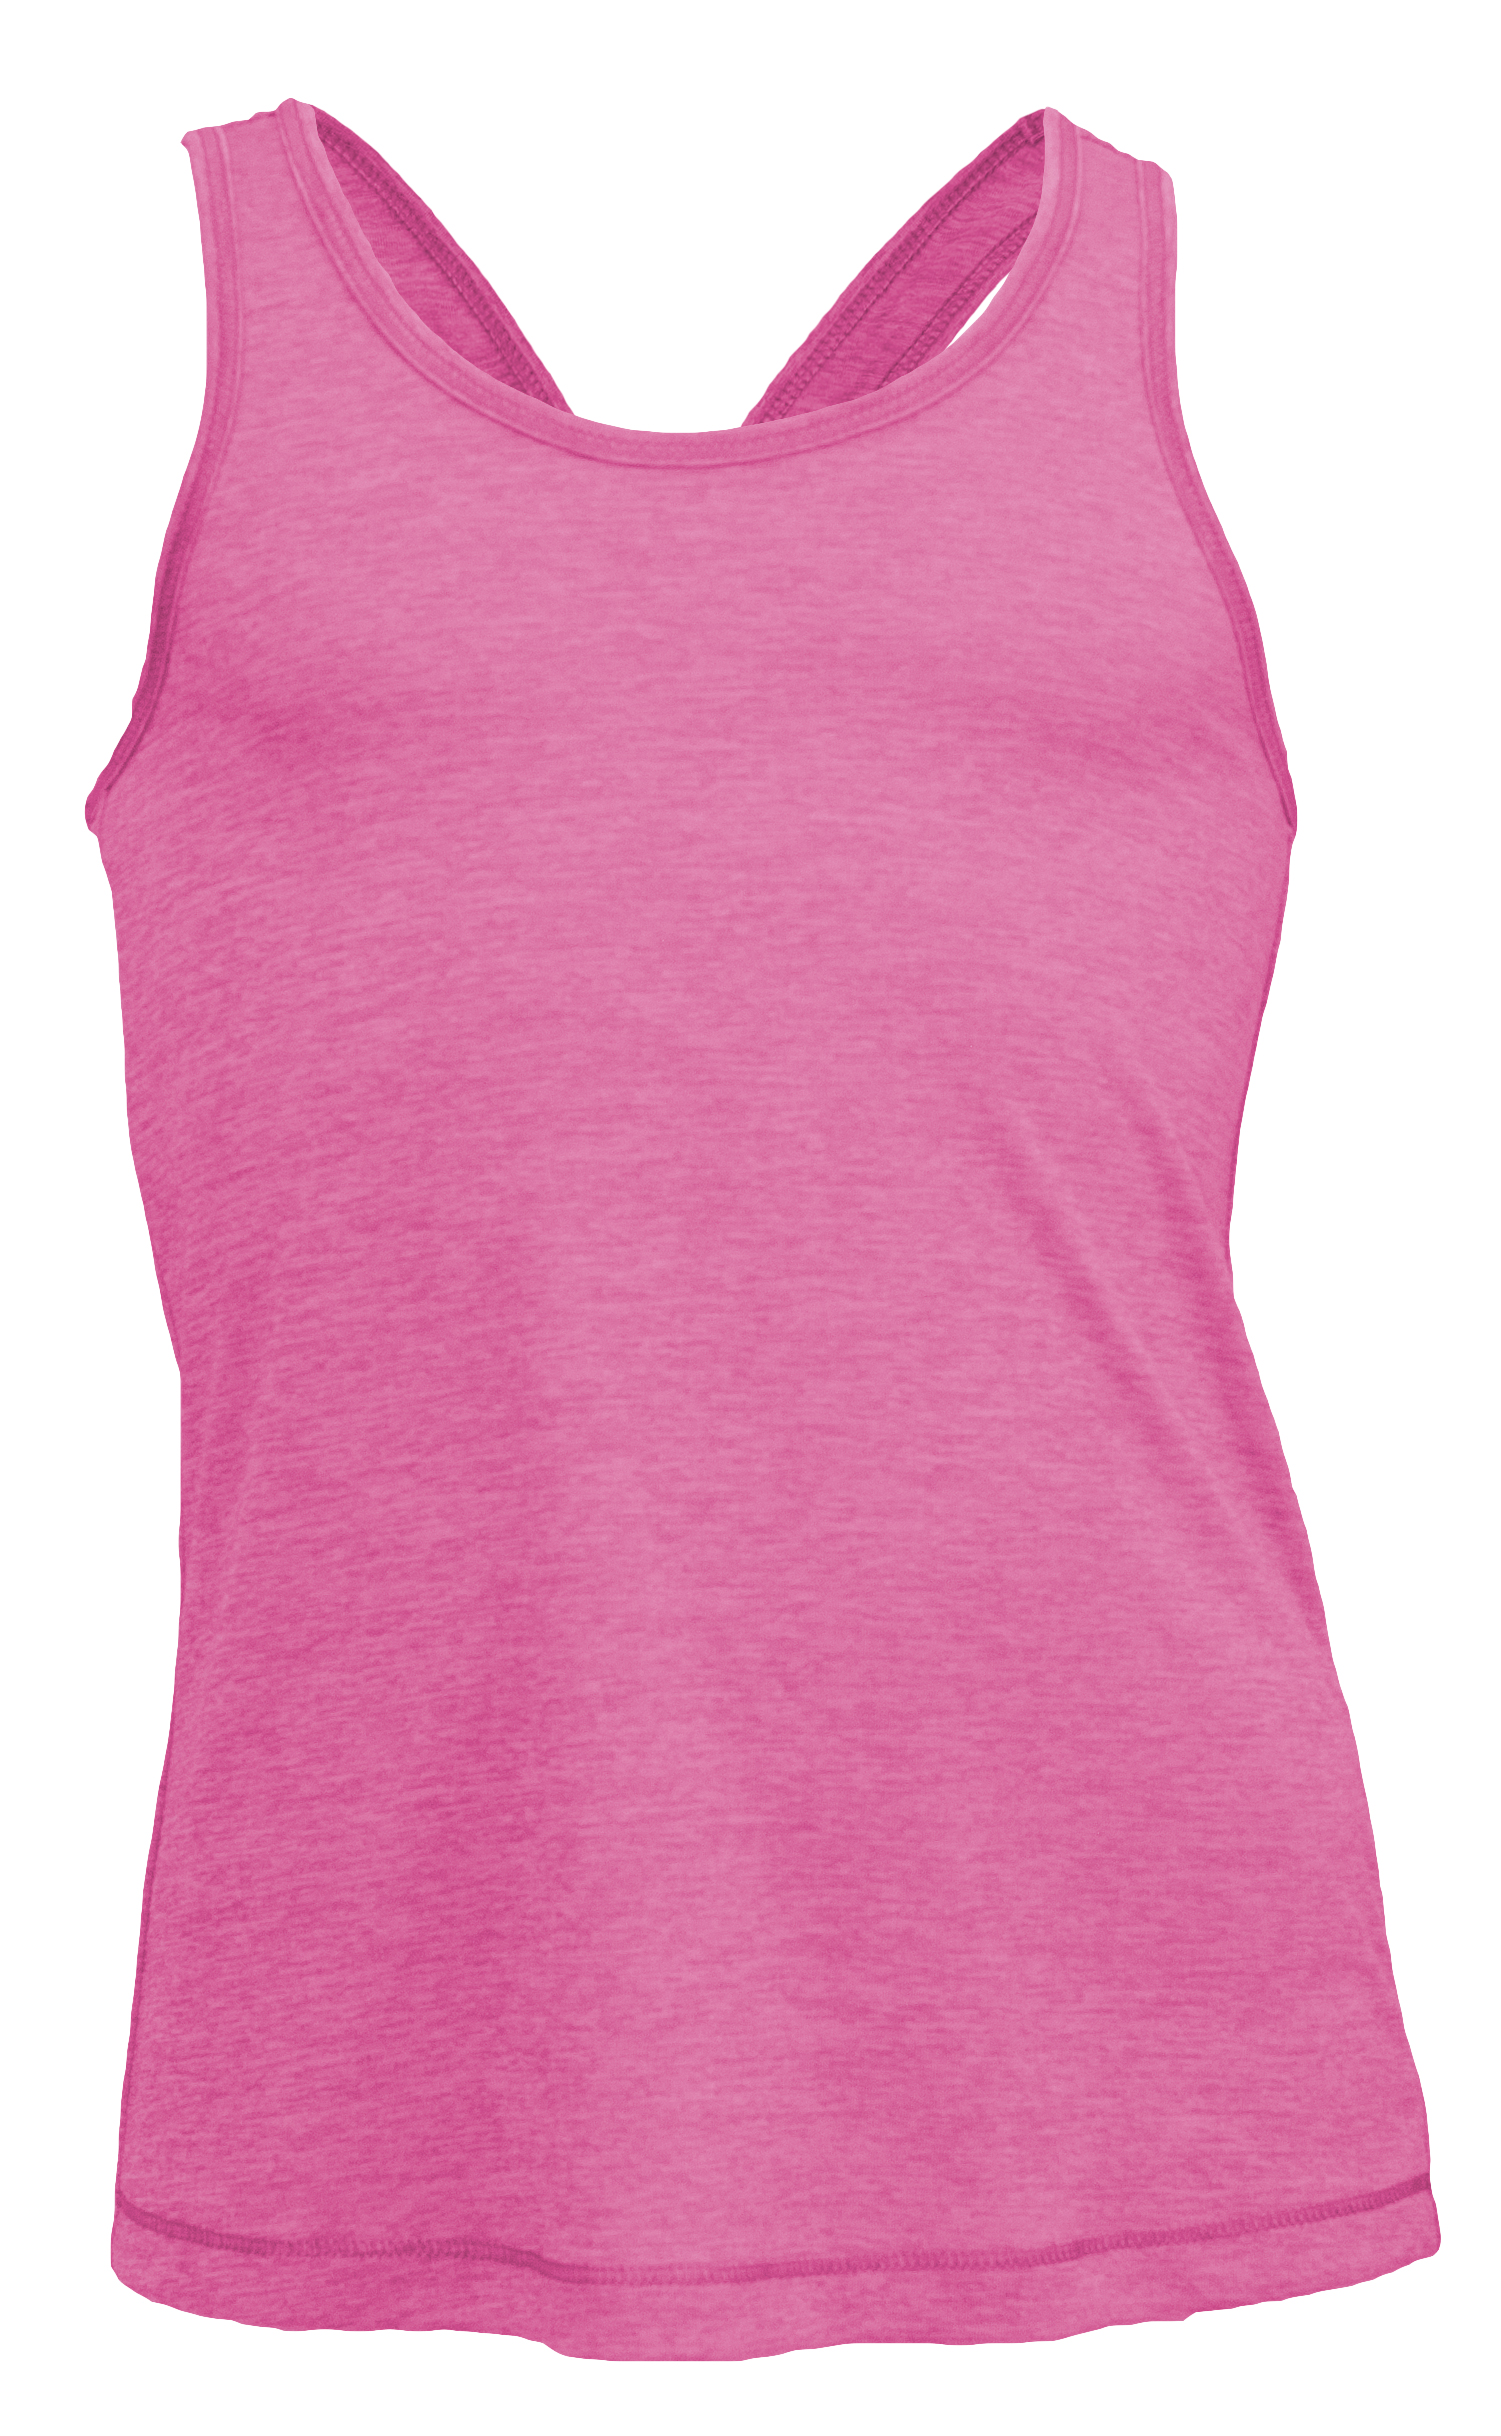 Soffe Girls Knotted Racerback